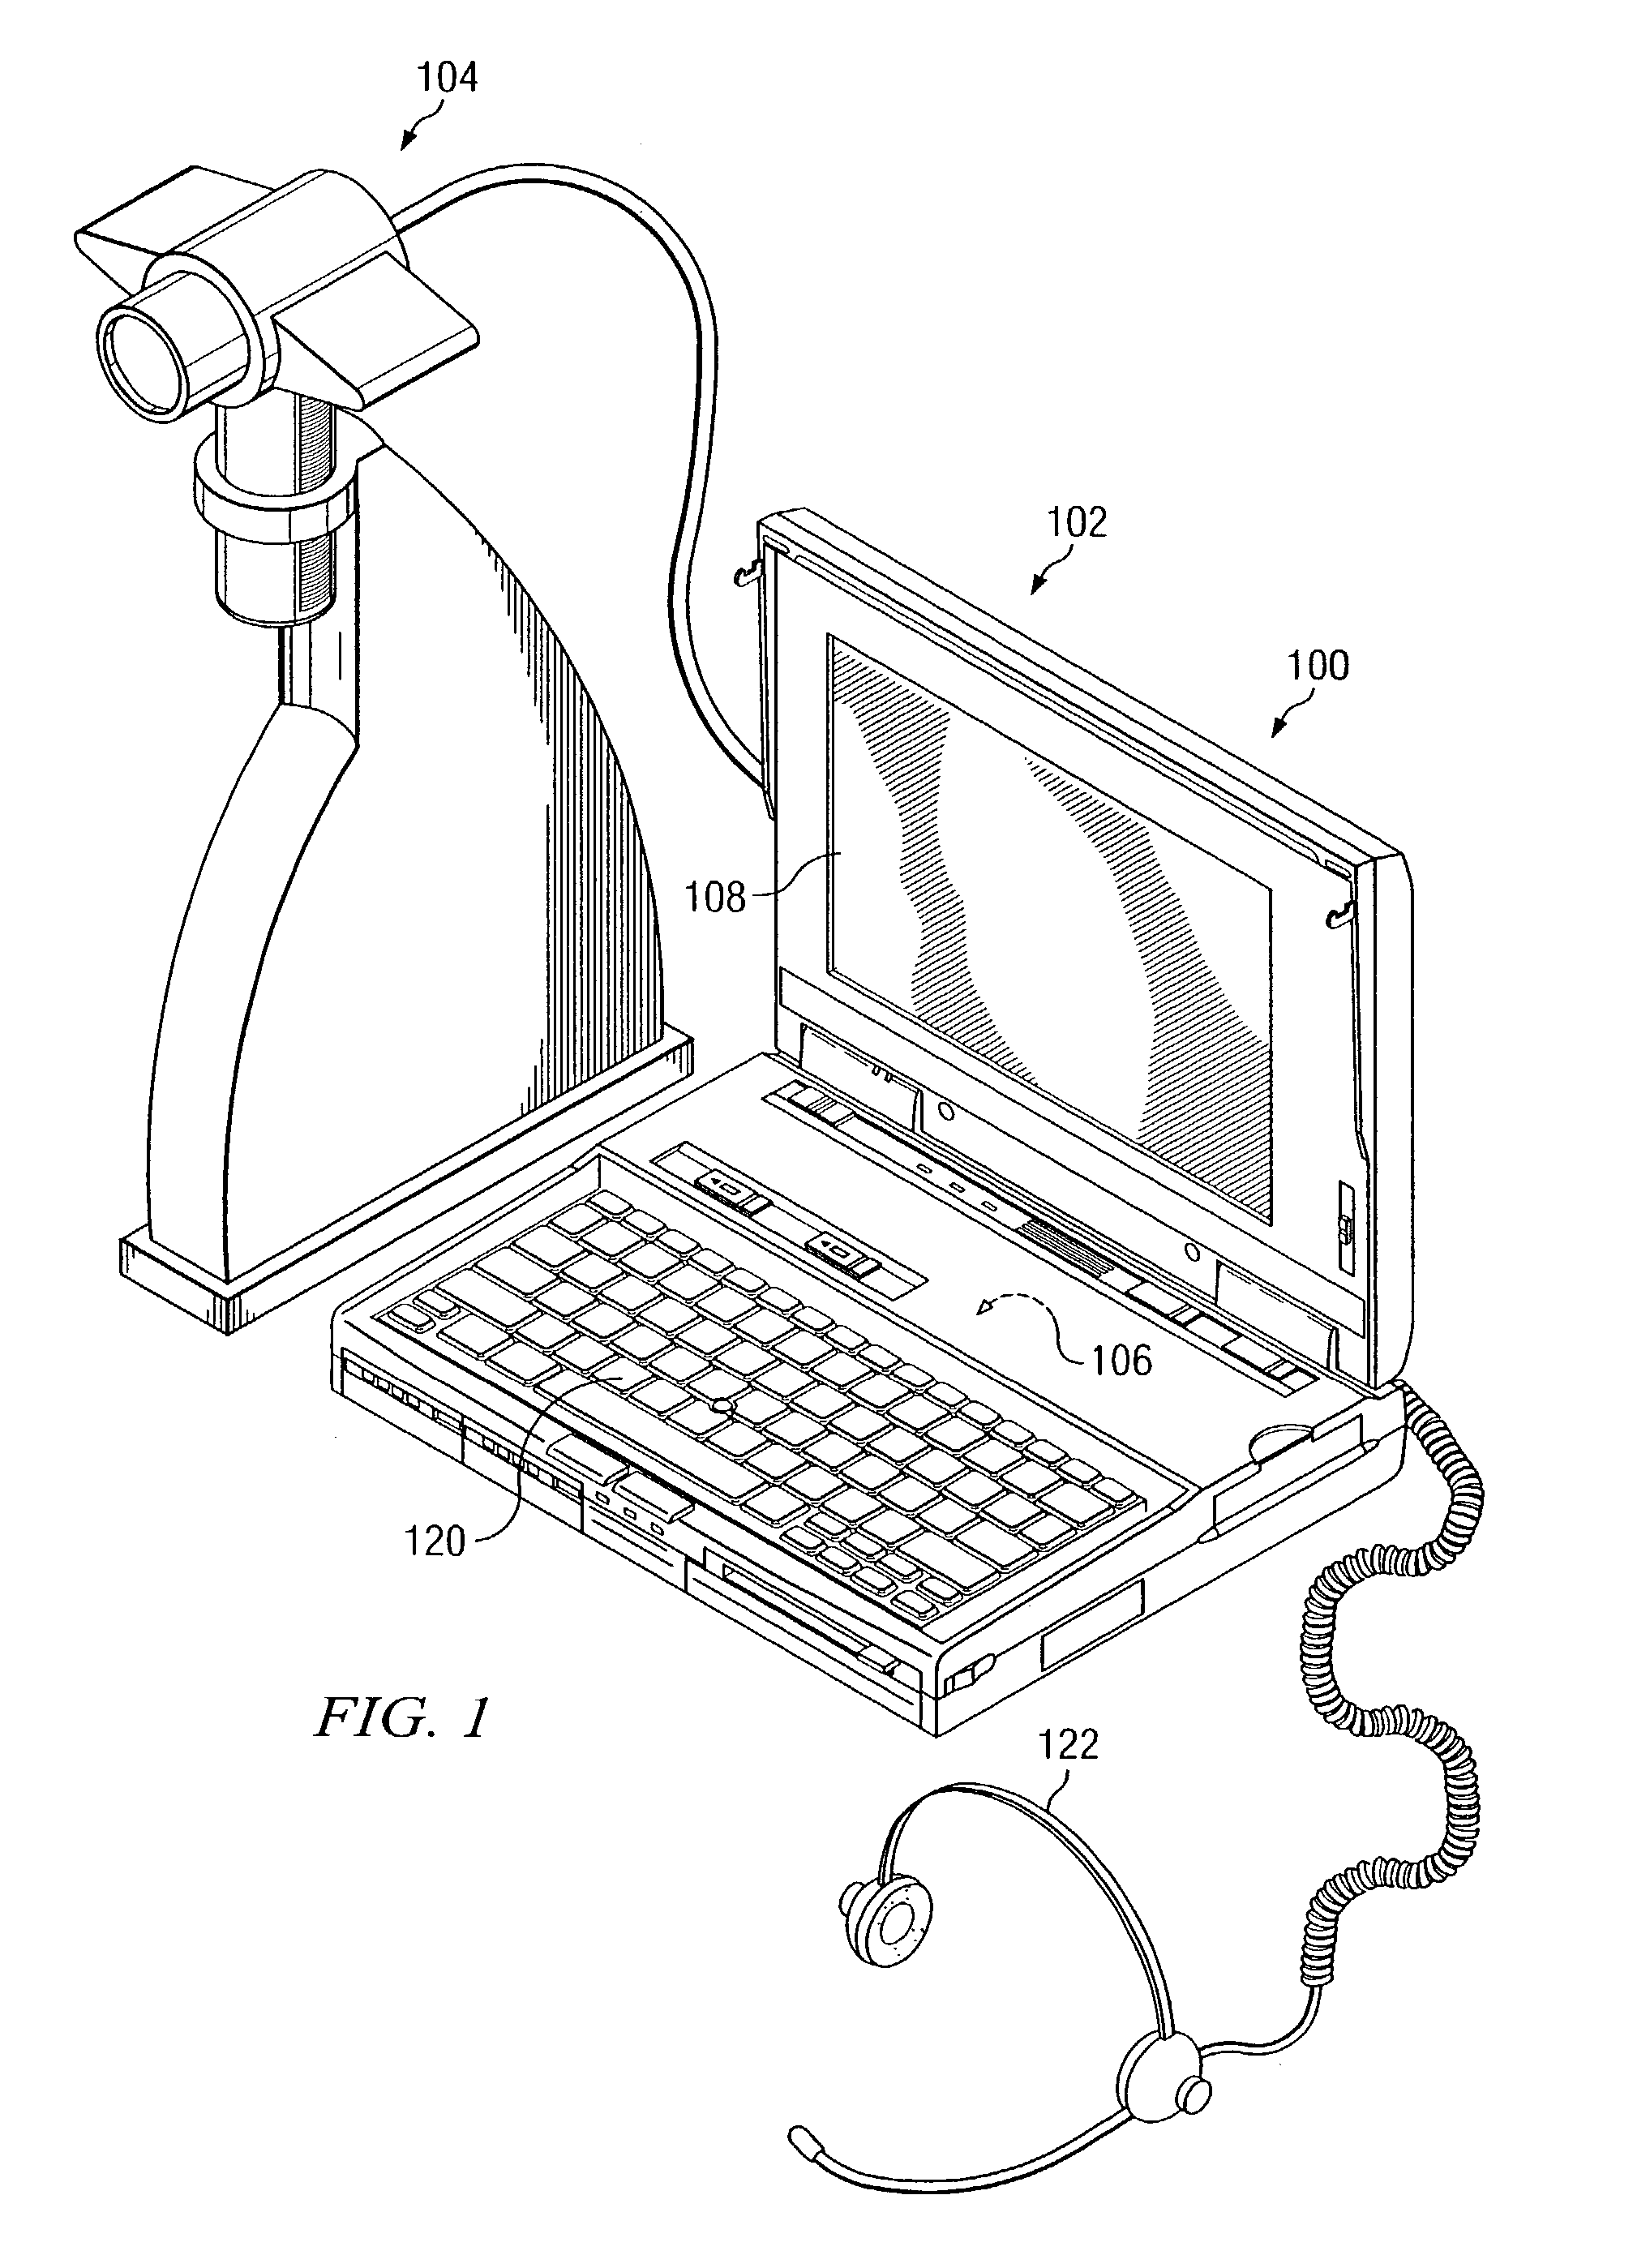 Apparatus and method for computerized multi-media medical and pharmaceutical data organization and transmission